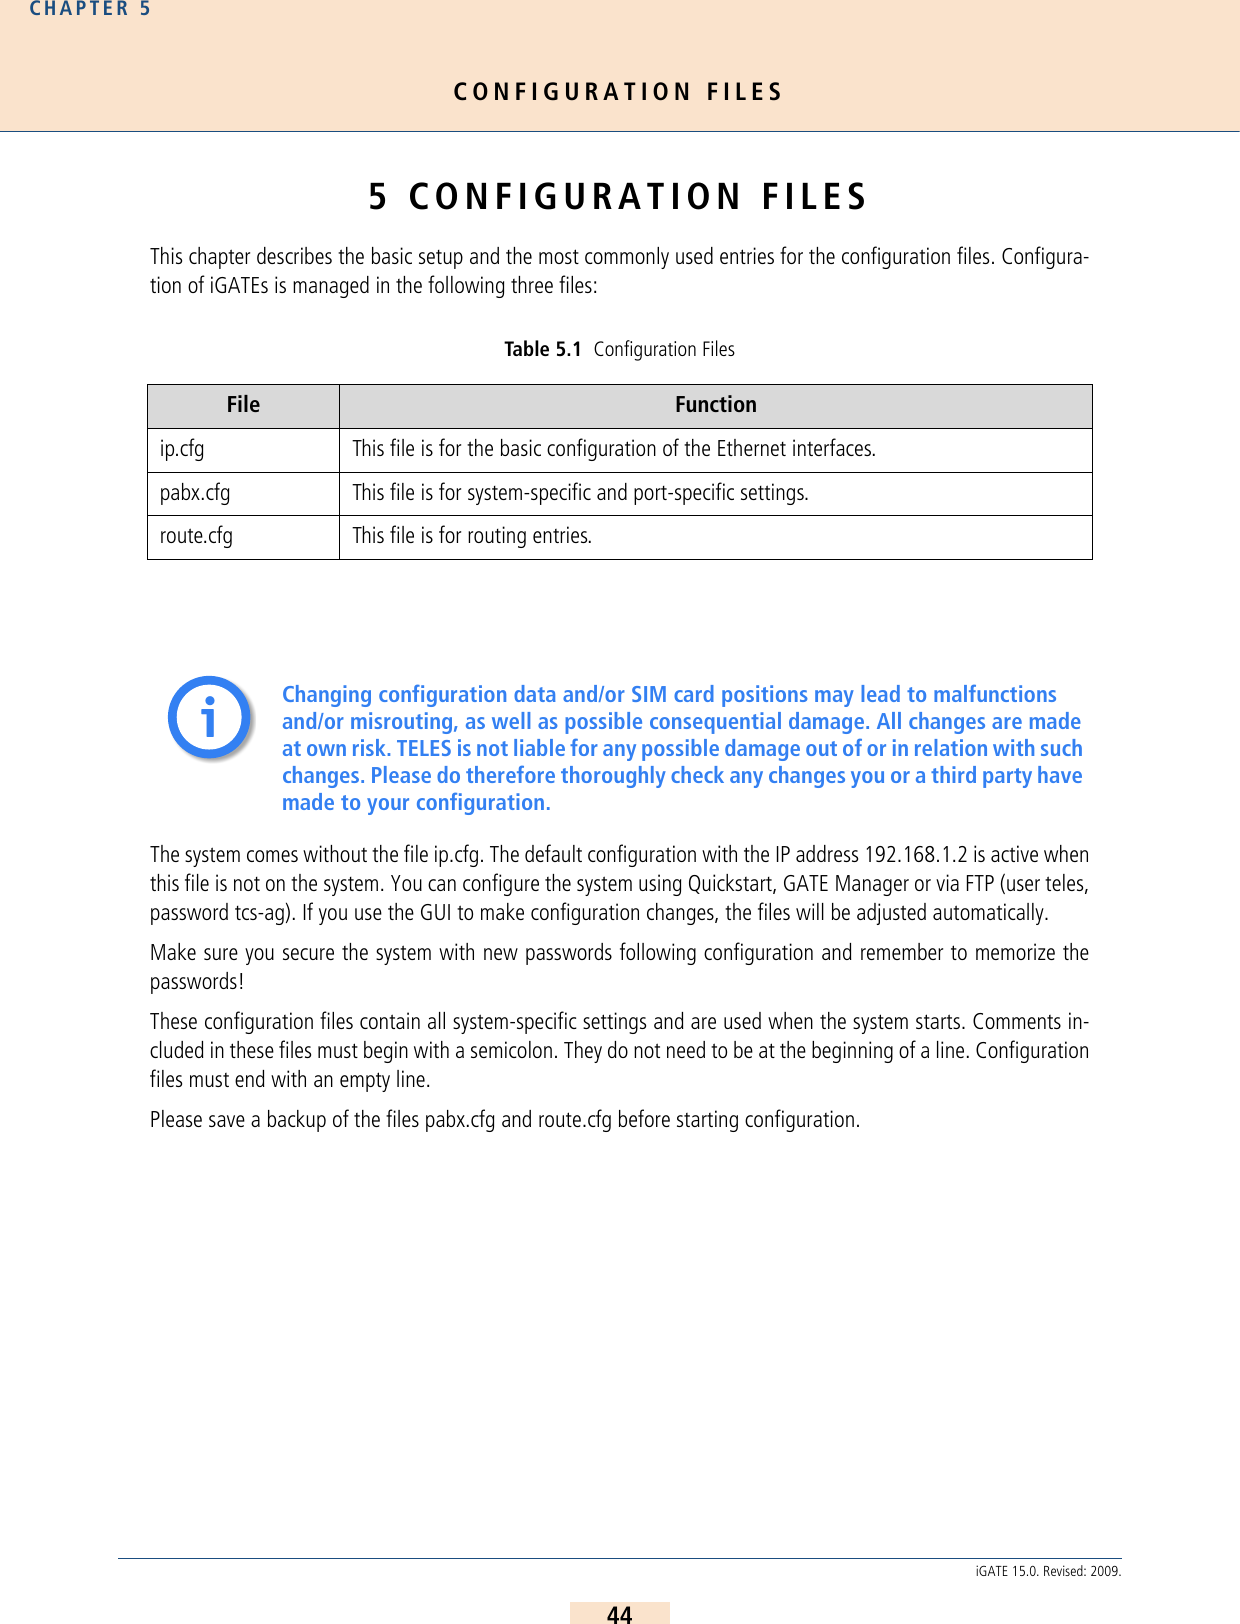 CONFIGURATION FILESCHAPTER 544iGATE 15.0. Revised: 2009.5 CONFIGURATION FILESThis chapter describes the basic setup and the most commonly used entries for the configuration files. Configura-tion of iGATEs is managed in the following three files: The system comes without the file ip.cfg. The default configuration with the IP address 192.168.1.2 is active whenthis file is not on the system. You can configure the system using Quickstart, GATE Manager or via FTP (user teles,password tcs-ag). If you use the GUI to make configuration changes, the files will be adjusted automatically.Make sure you secure the system with new passwords following configuration and remember to memorize thepasswords! These configuration files contain all system-specific settings and are used when the system starts. Comments in-cluded in these files must begin with a semicolon. They do not need to be at the beginning of a line. Configurationfiles must end with an empty line.Please save a backup of the files pabx.cfg and route.cfg before starting configuration.Table 5.1  Configuration FilesFile Functionip.cfg This file is for the basic configuration of the Ethernet interfaces.pabx.cfg This file is for system-specific and port-specific settings.route.cfg This file is for routing entries.Changing configuration data and/or SIM card positions may lead to malfunctions and/or misrouting, as well as possible consequential damage. All changes are made at own risk. TELES is not liable for any possible damage out of or in relation with such changes. Please do therefore thoroughly check any changes you or a third party have made to your configuration.ii